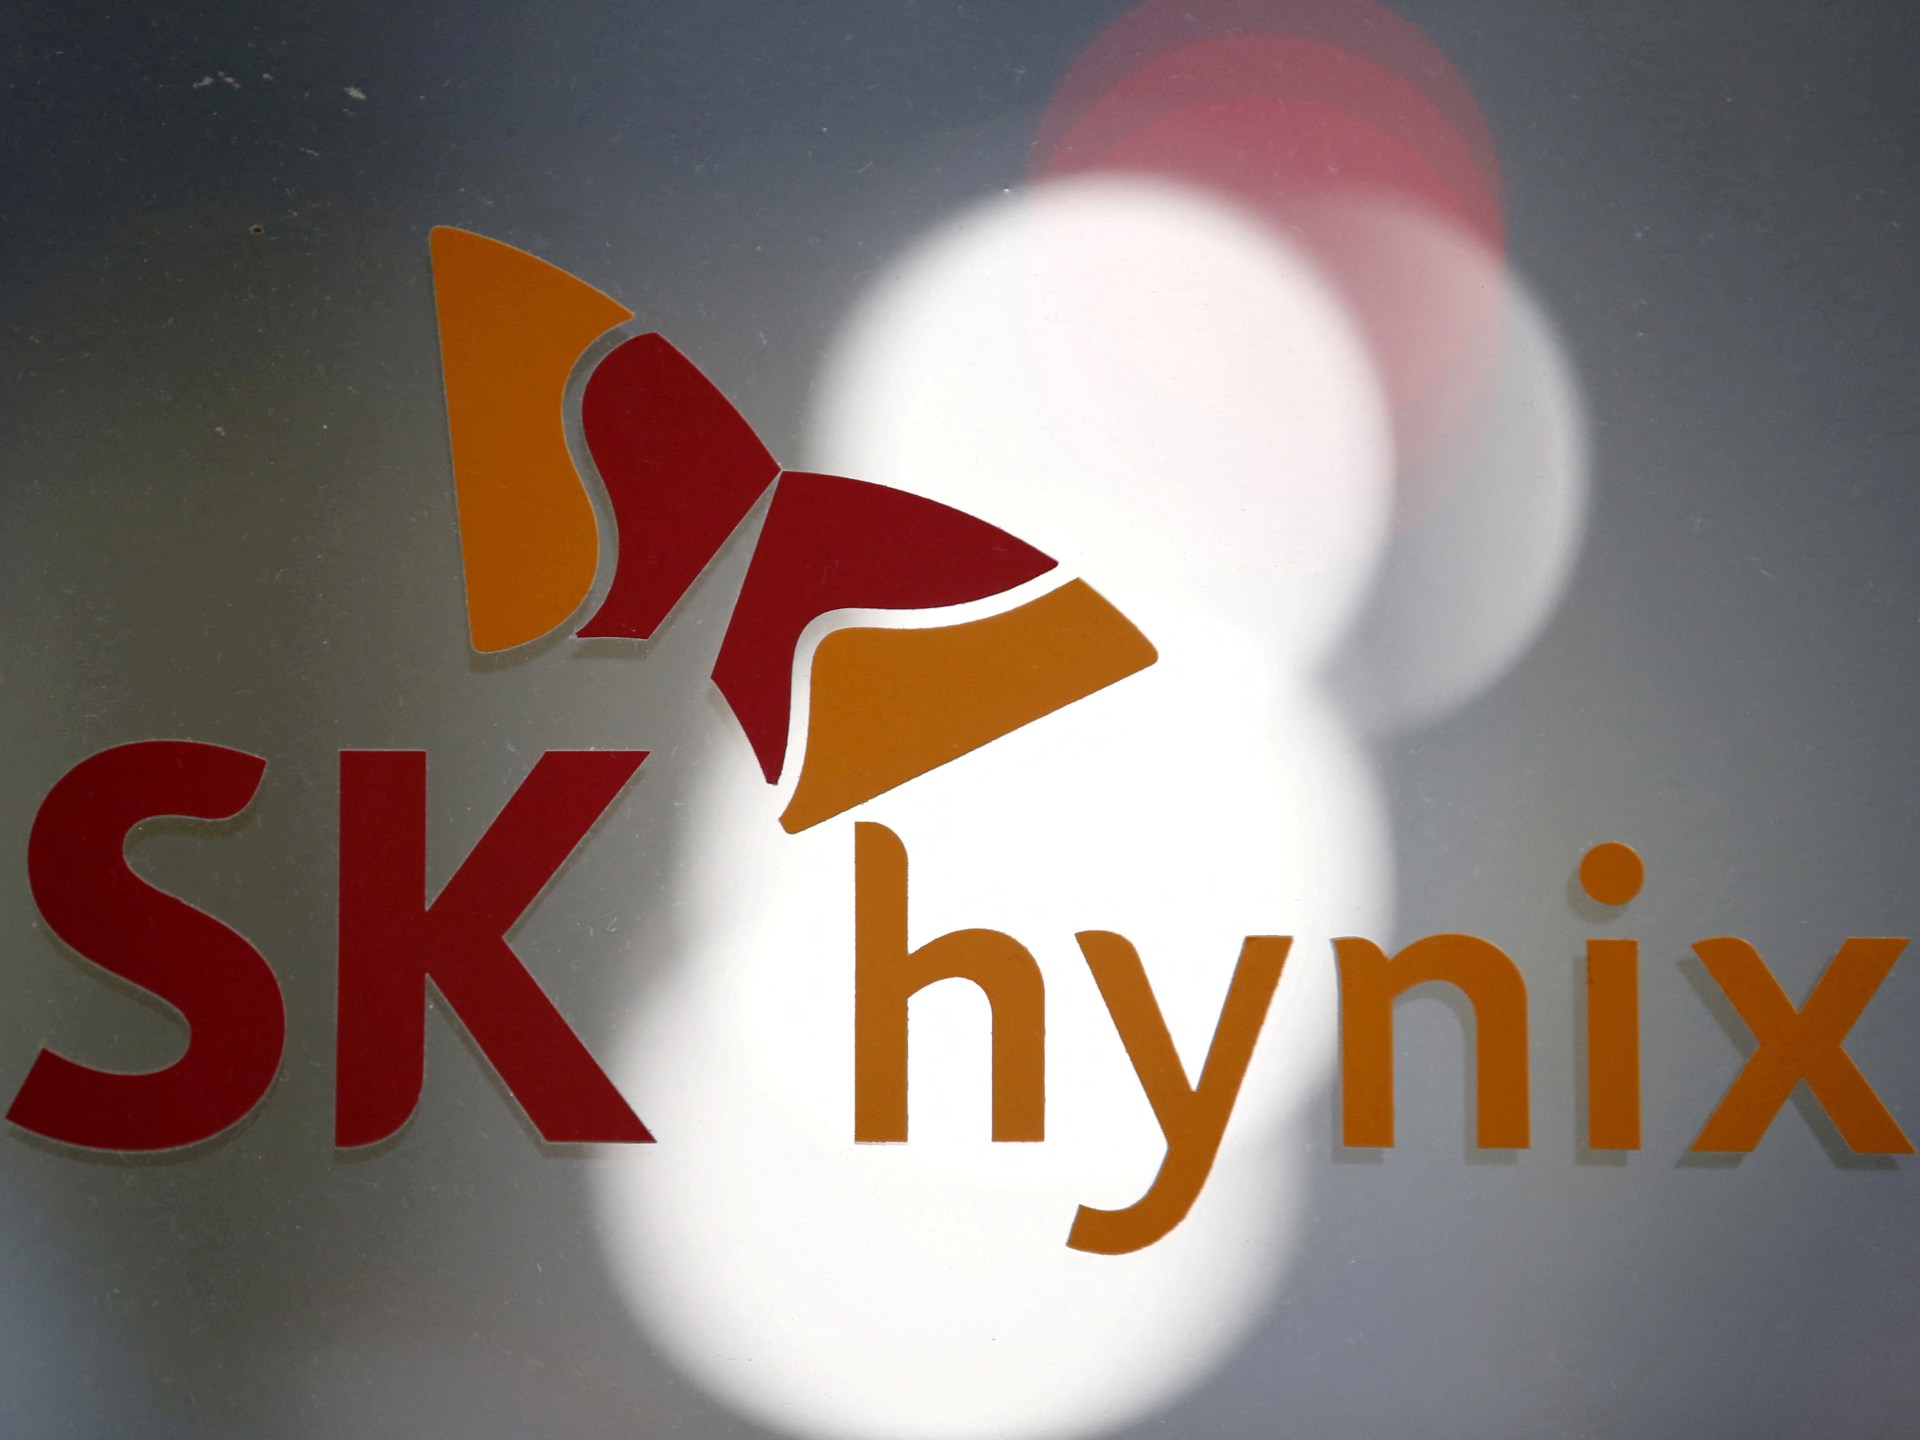 South Korea’s SK Hynix to launch US chip plant in 2023: Sources